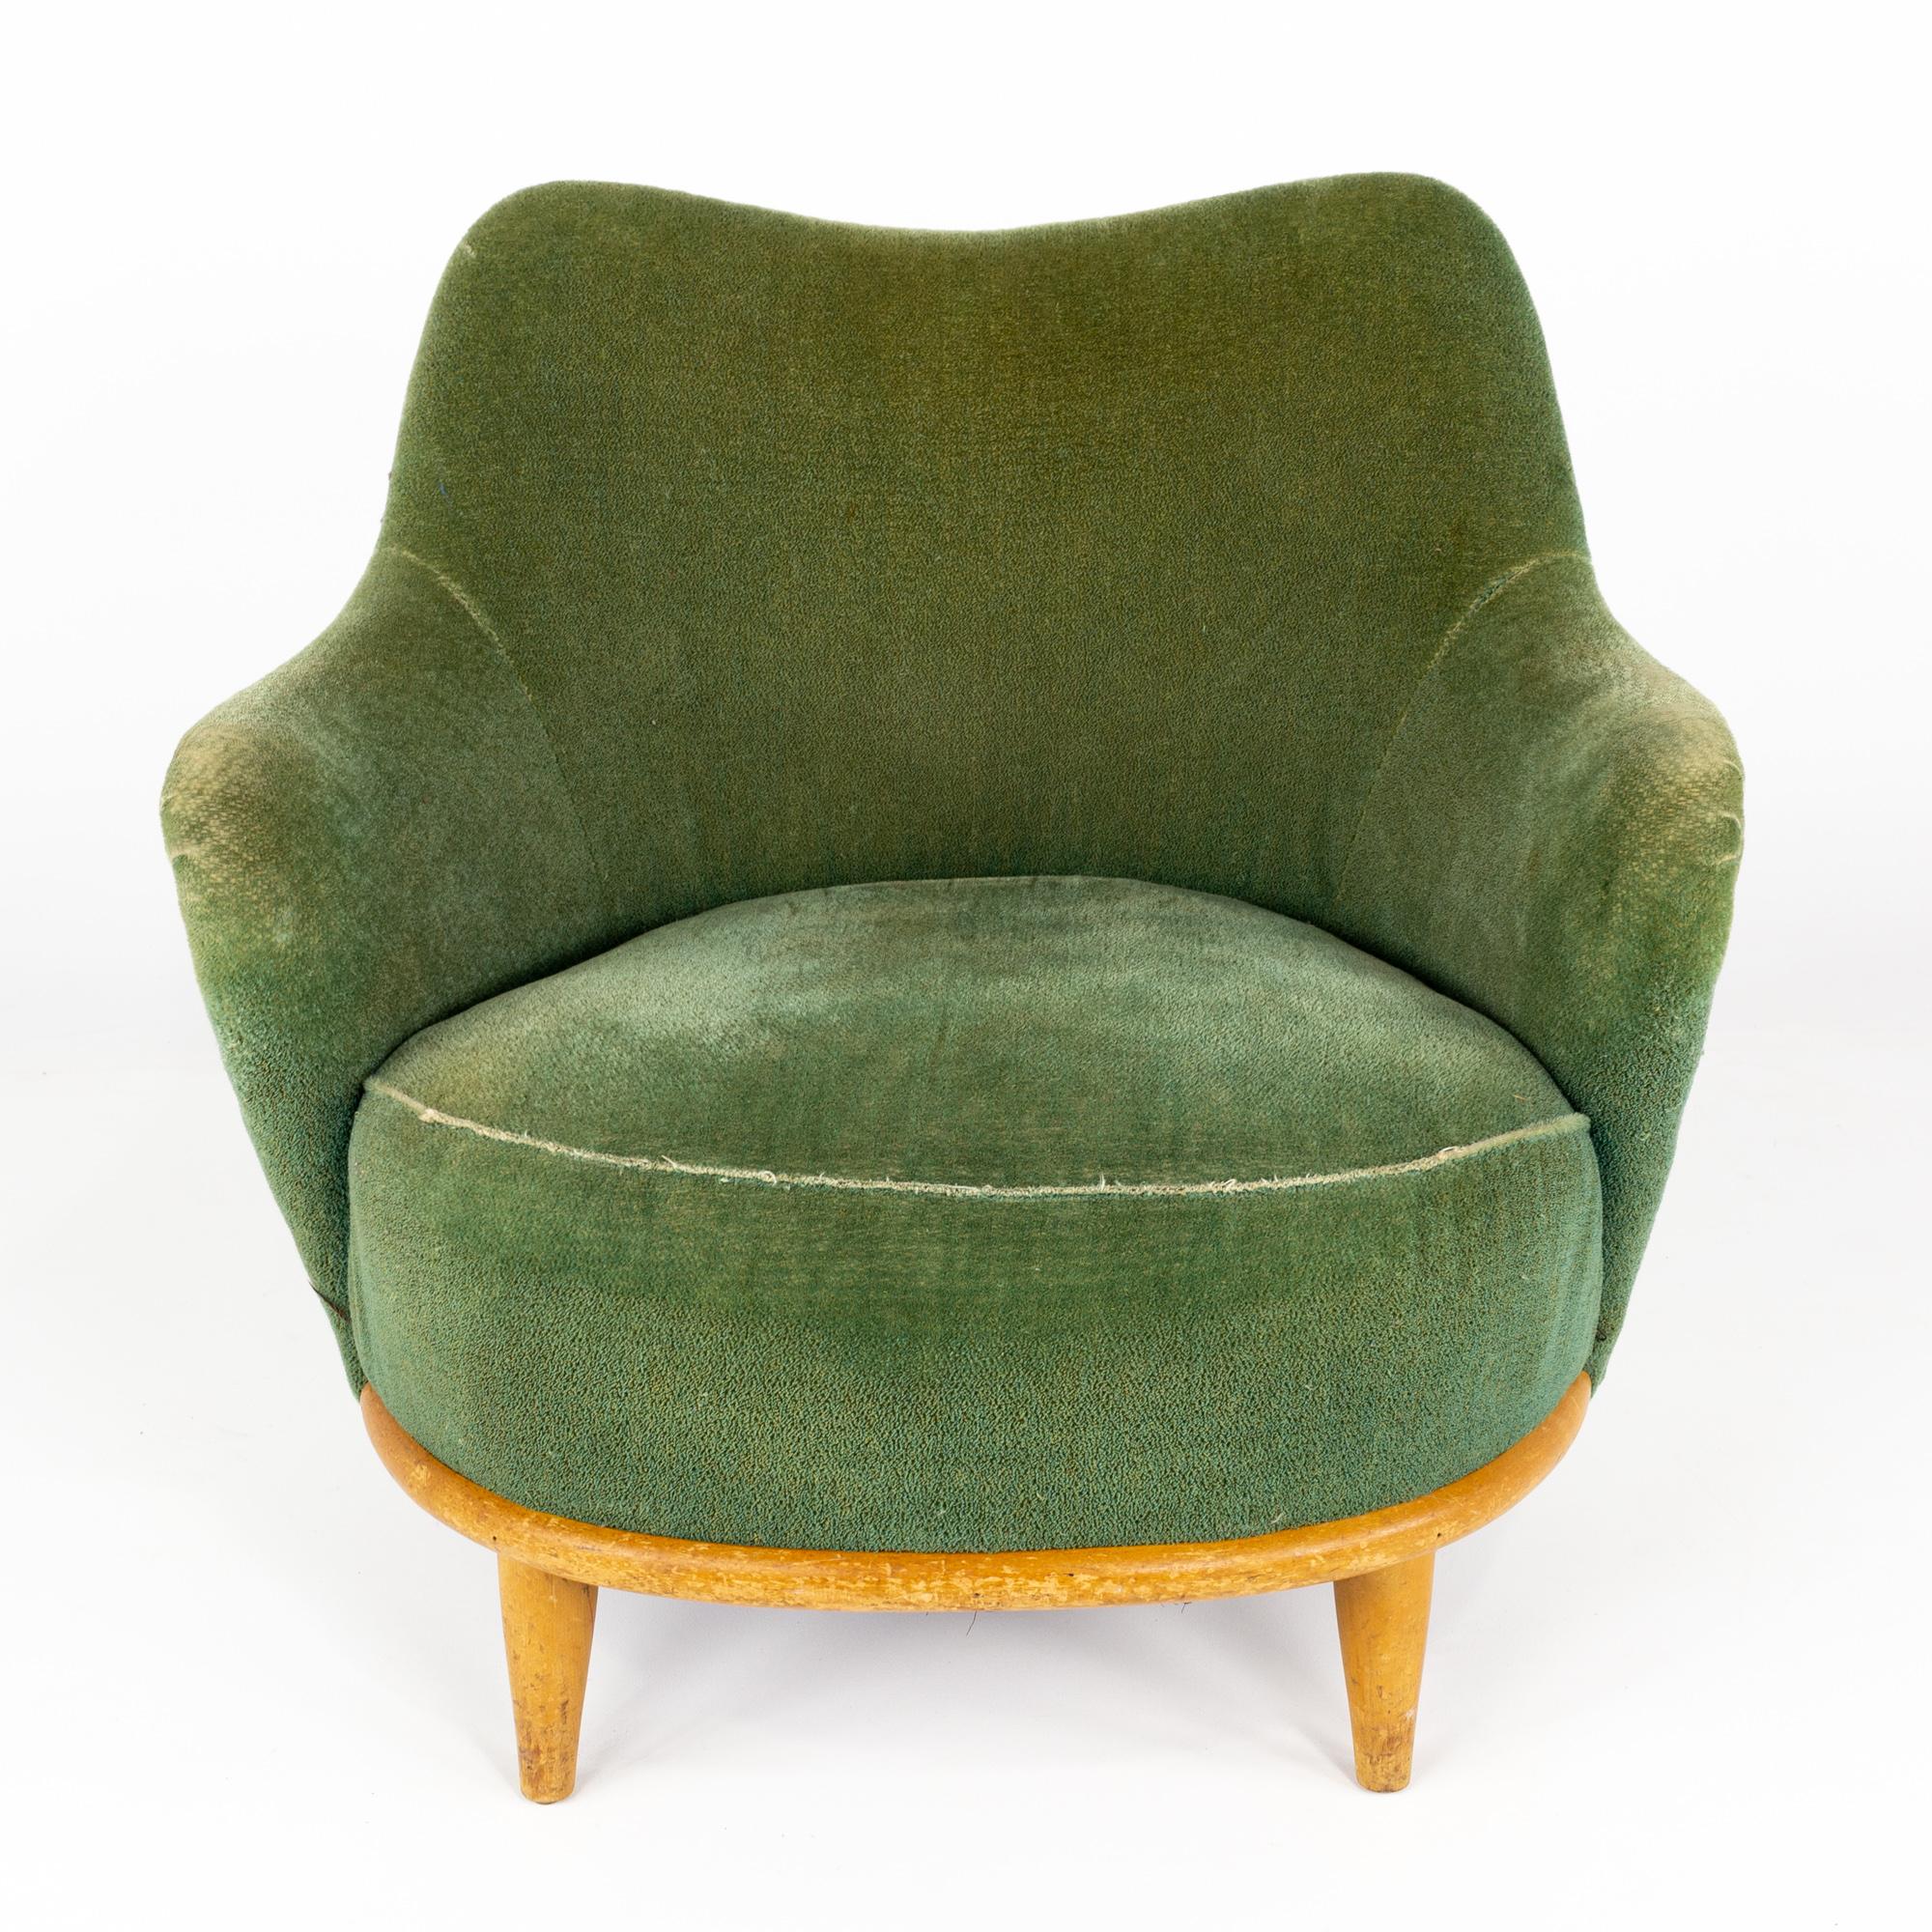 Heywood Wakefield mid century green velvet upholstered tub lounge chair

The lounge chair measures: 31.5 wide x 29 deep x 30 high, with a seat height of 15 inches and arm height of 21 inches

Ready for new upholstery. This service is available